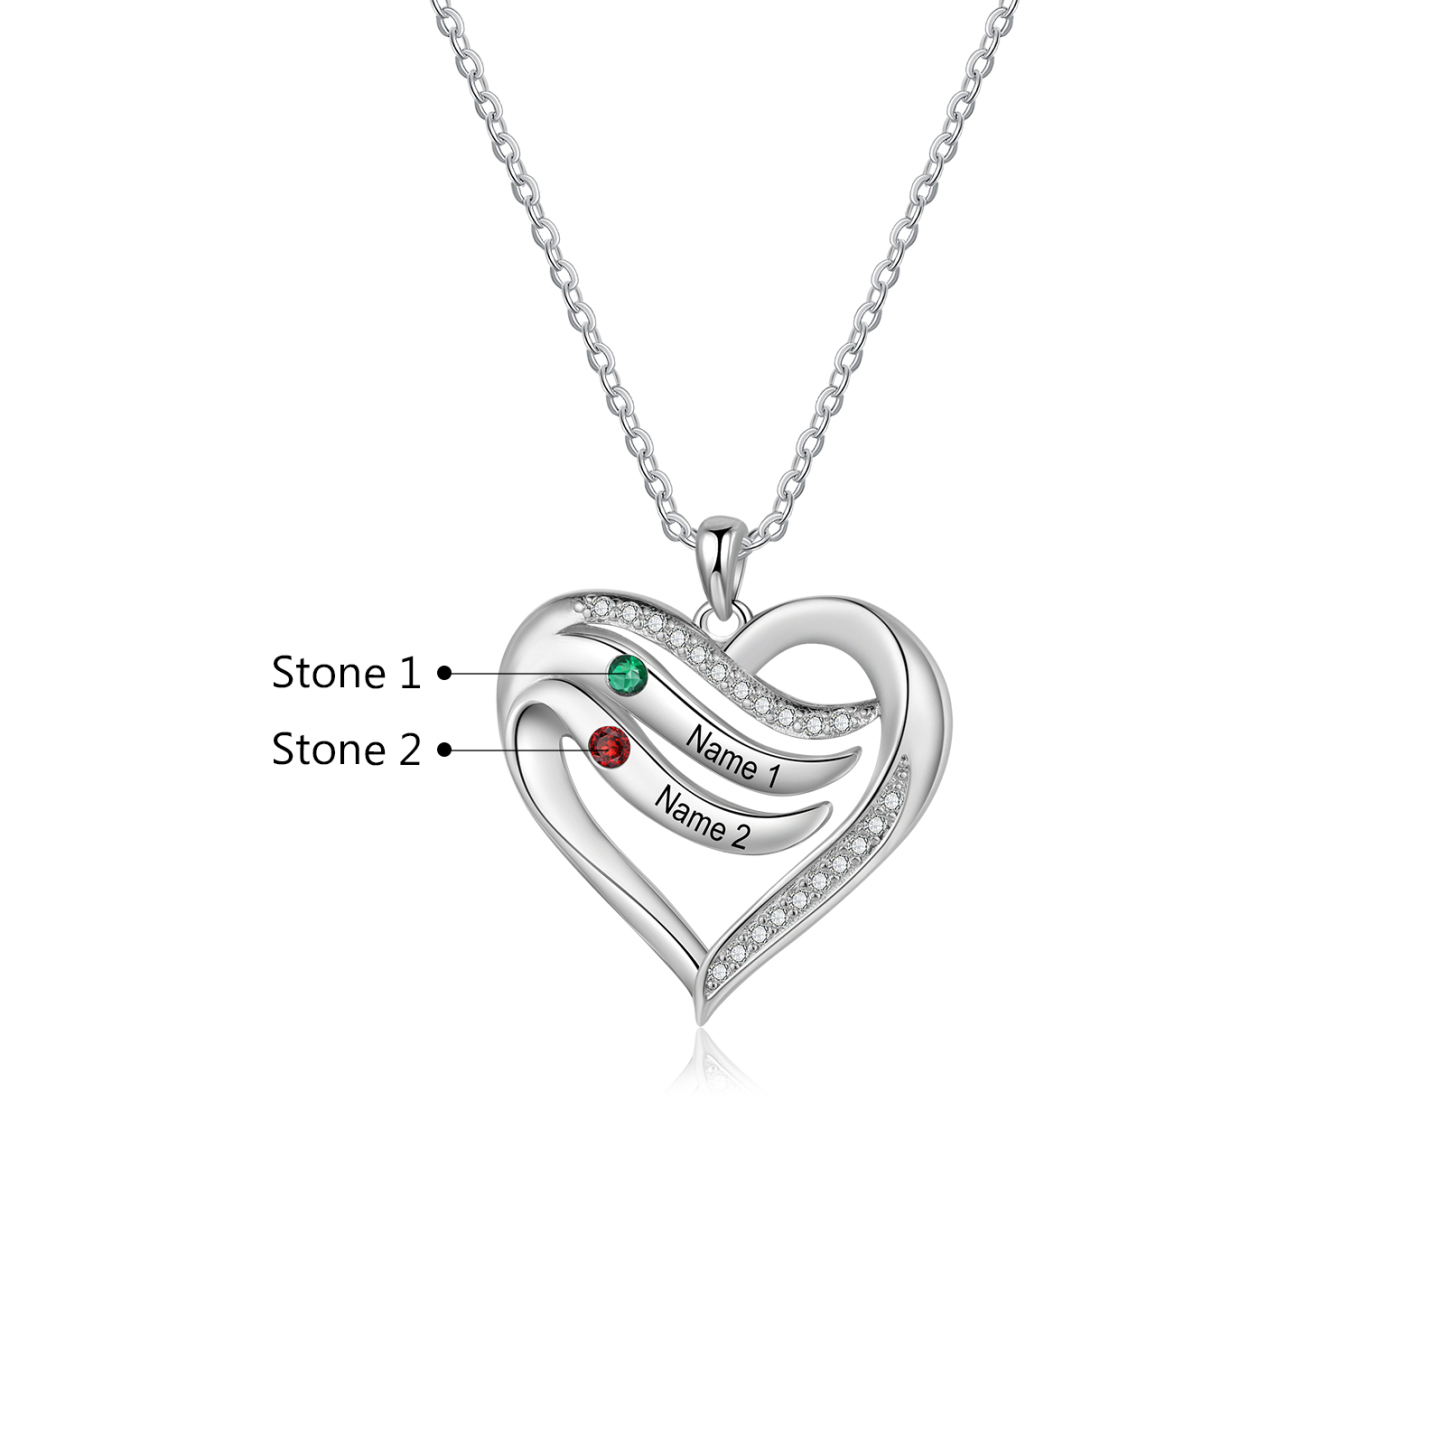 2 Names - Personalized S925 Silver Heart Necklace with Birthstone and Name, Beautiful Gift for Her